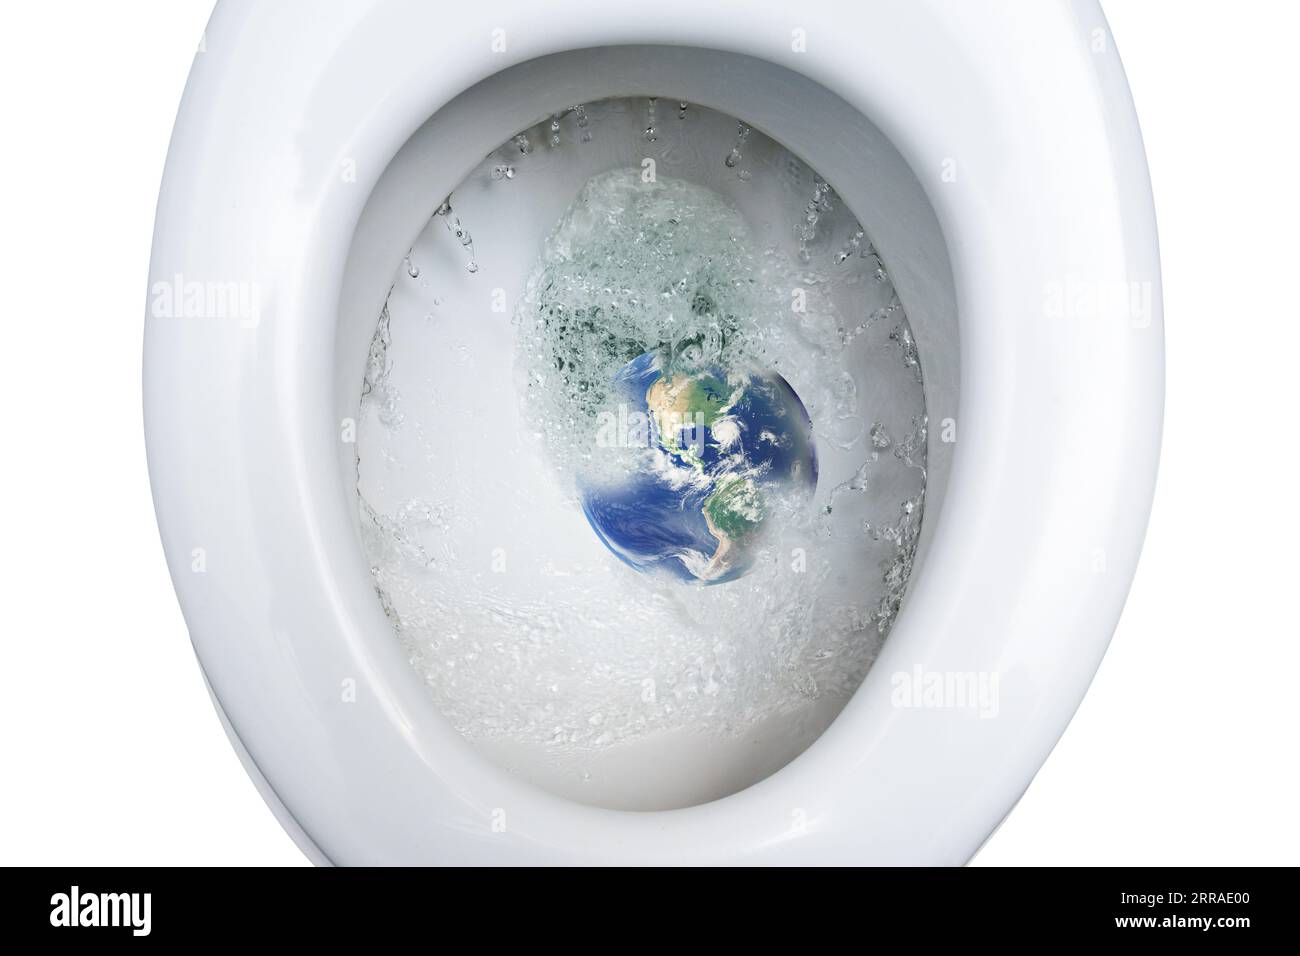 Planet earth is flushed with a lot of drinking water into a toilet bowl, waste of environmental resources and water saving concept, top view, copy spa Stock Photo